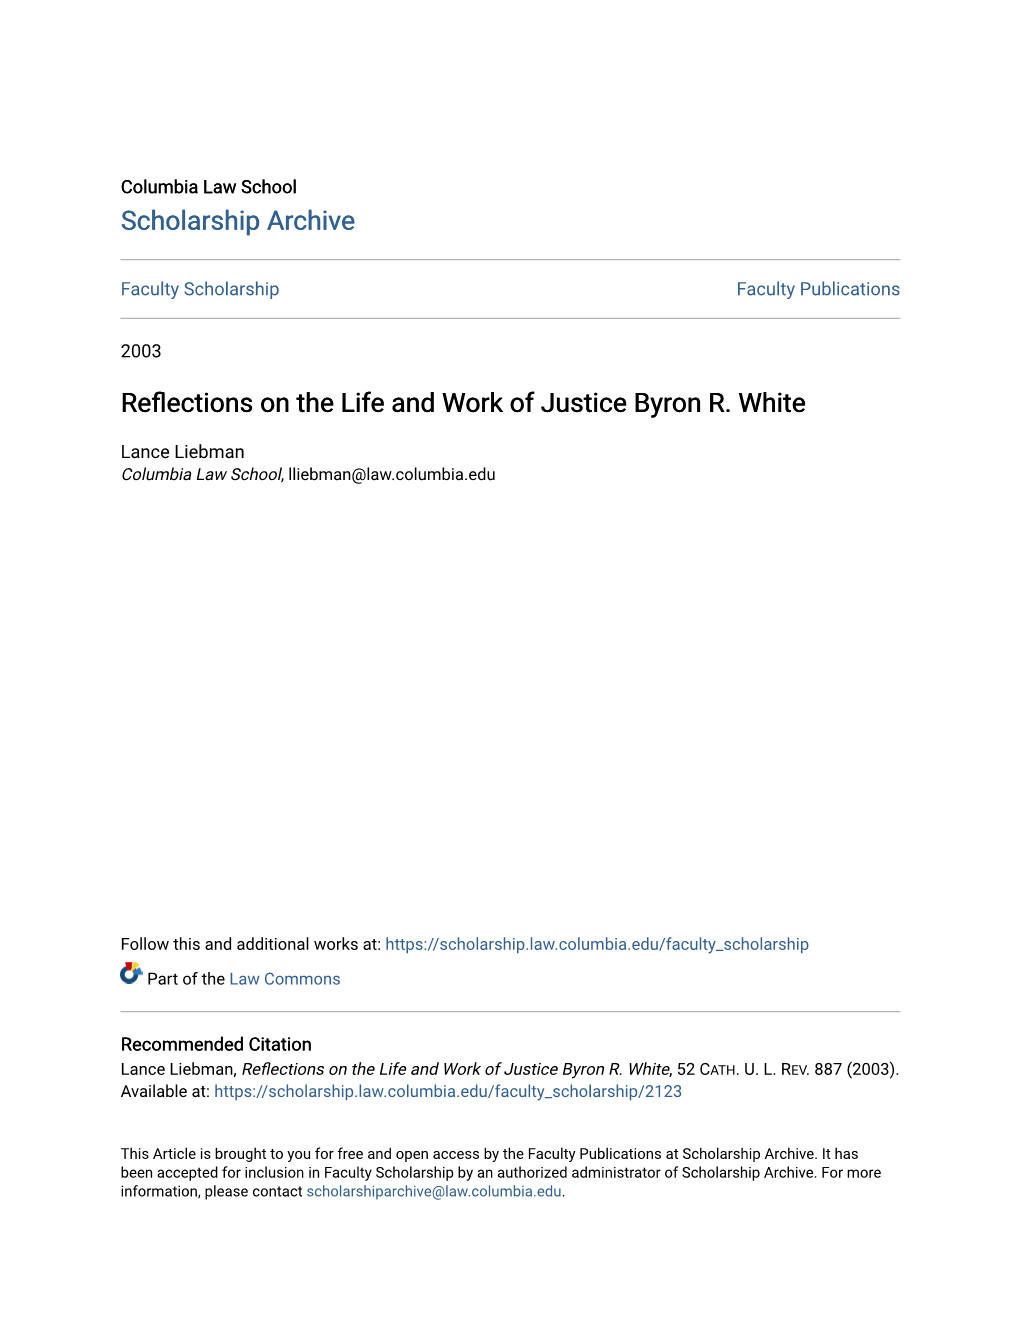 Reflections on the Life and Work of Justice Byron R. White